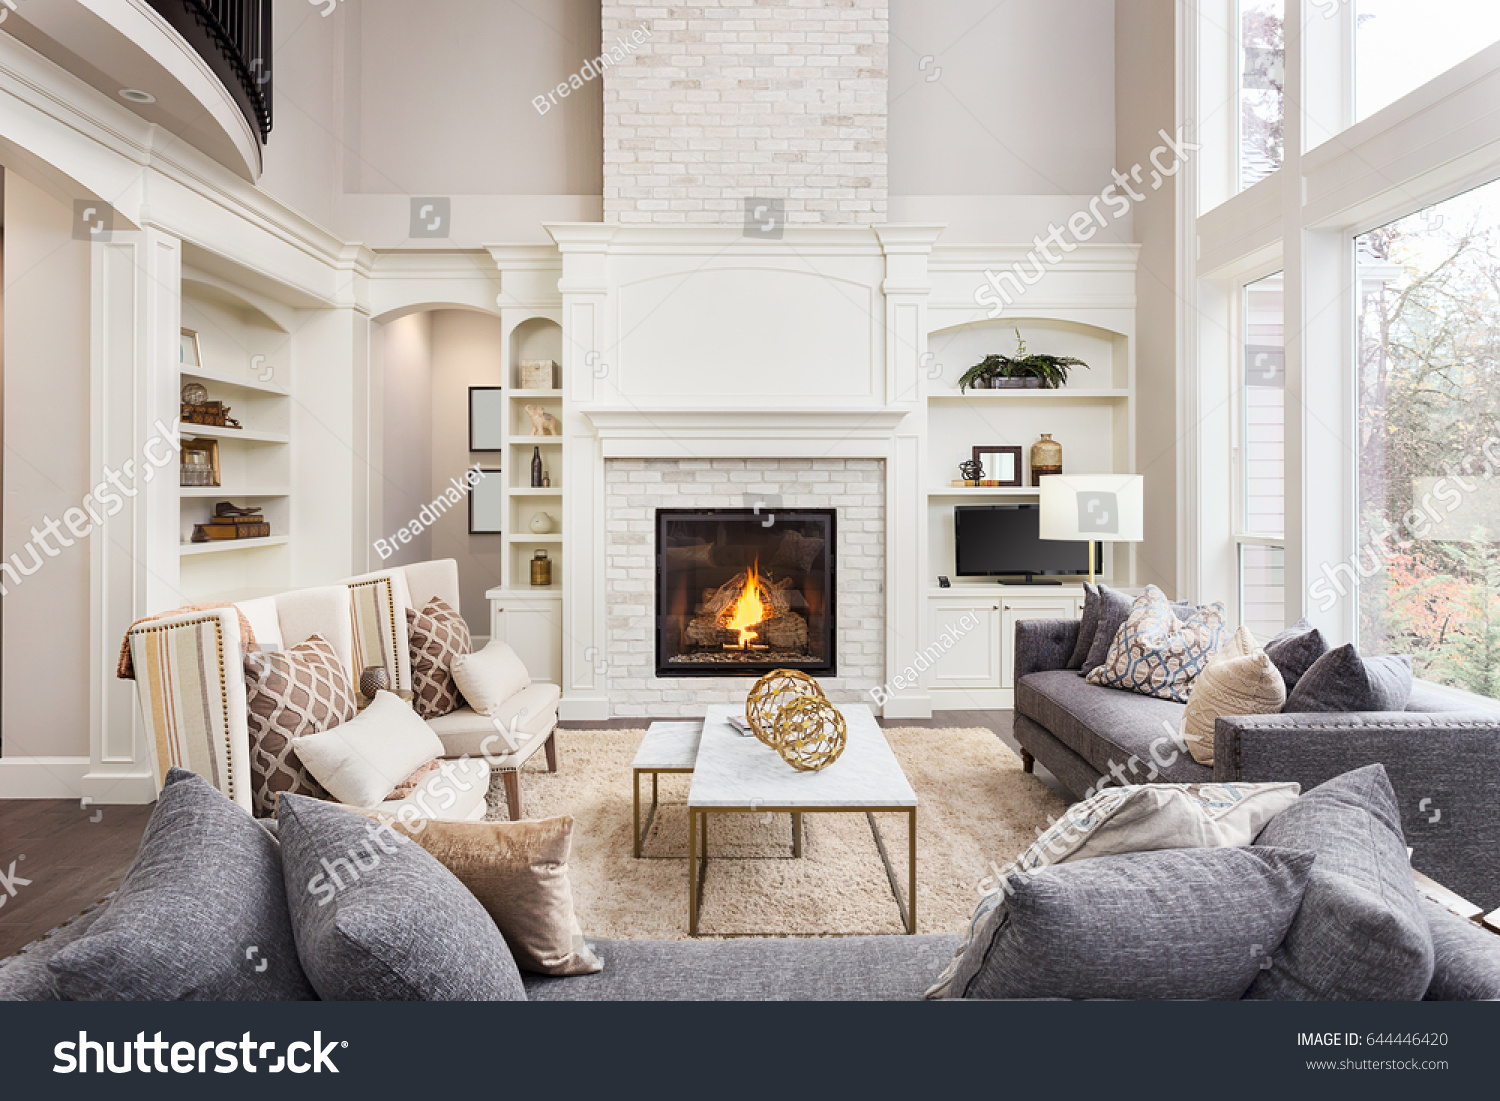 Beautiful living room interior with hardwood floors and fireplace in new luxury home. Large bank of windows hints at exterior view #644446420